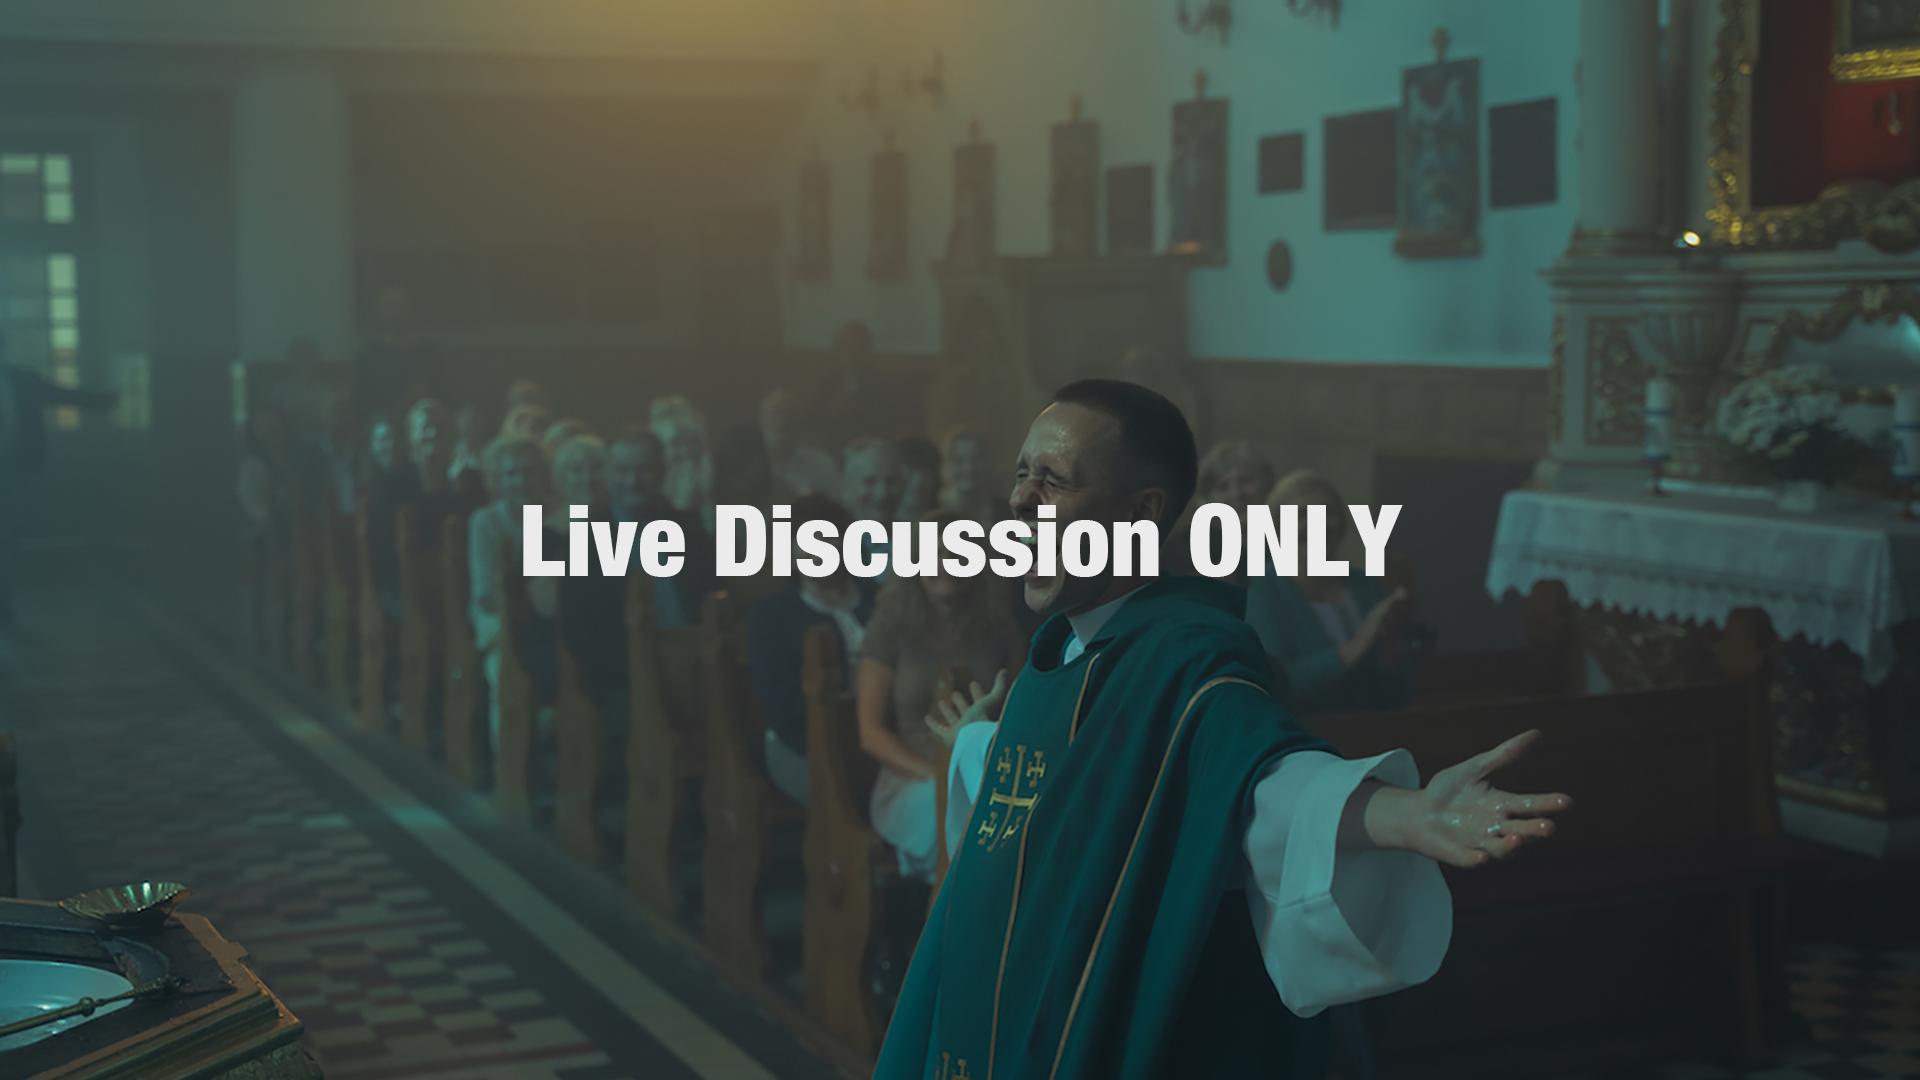 Corpus Christi Live Discussion with Director Jan Komasa [FREE LIVE DISCUSSION ONLY]